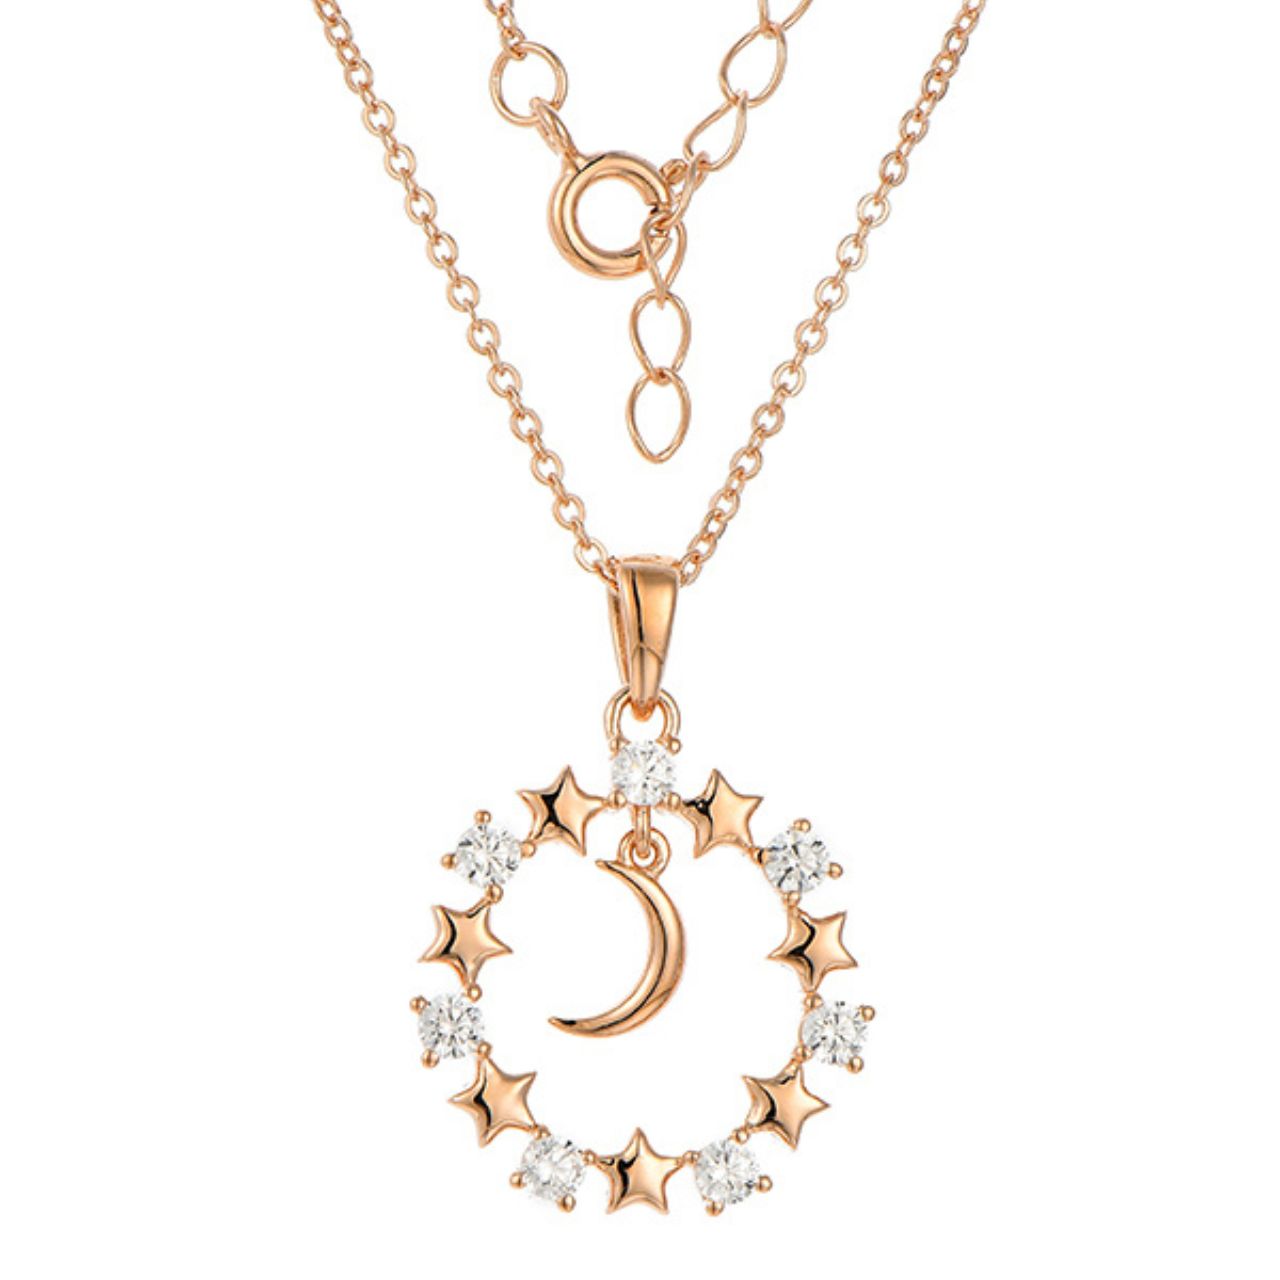 Rose Gold Starry Night Necklace by Kilkenny Silver  Sterling silver rose gold plated necklace with has a moon surrounded by stars and sparkly cubic zirconia to give starry night design.